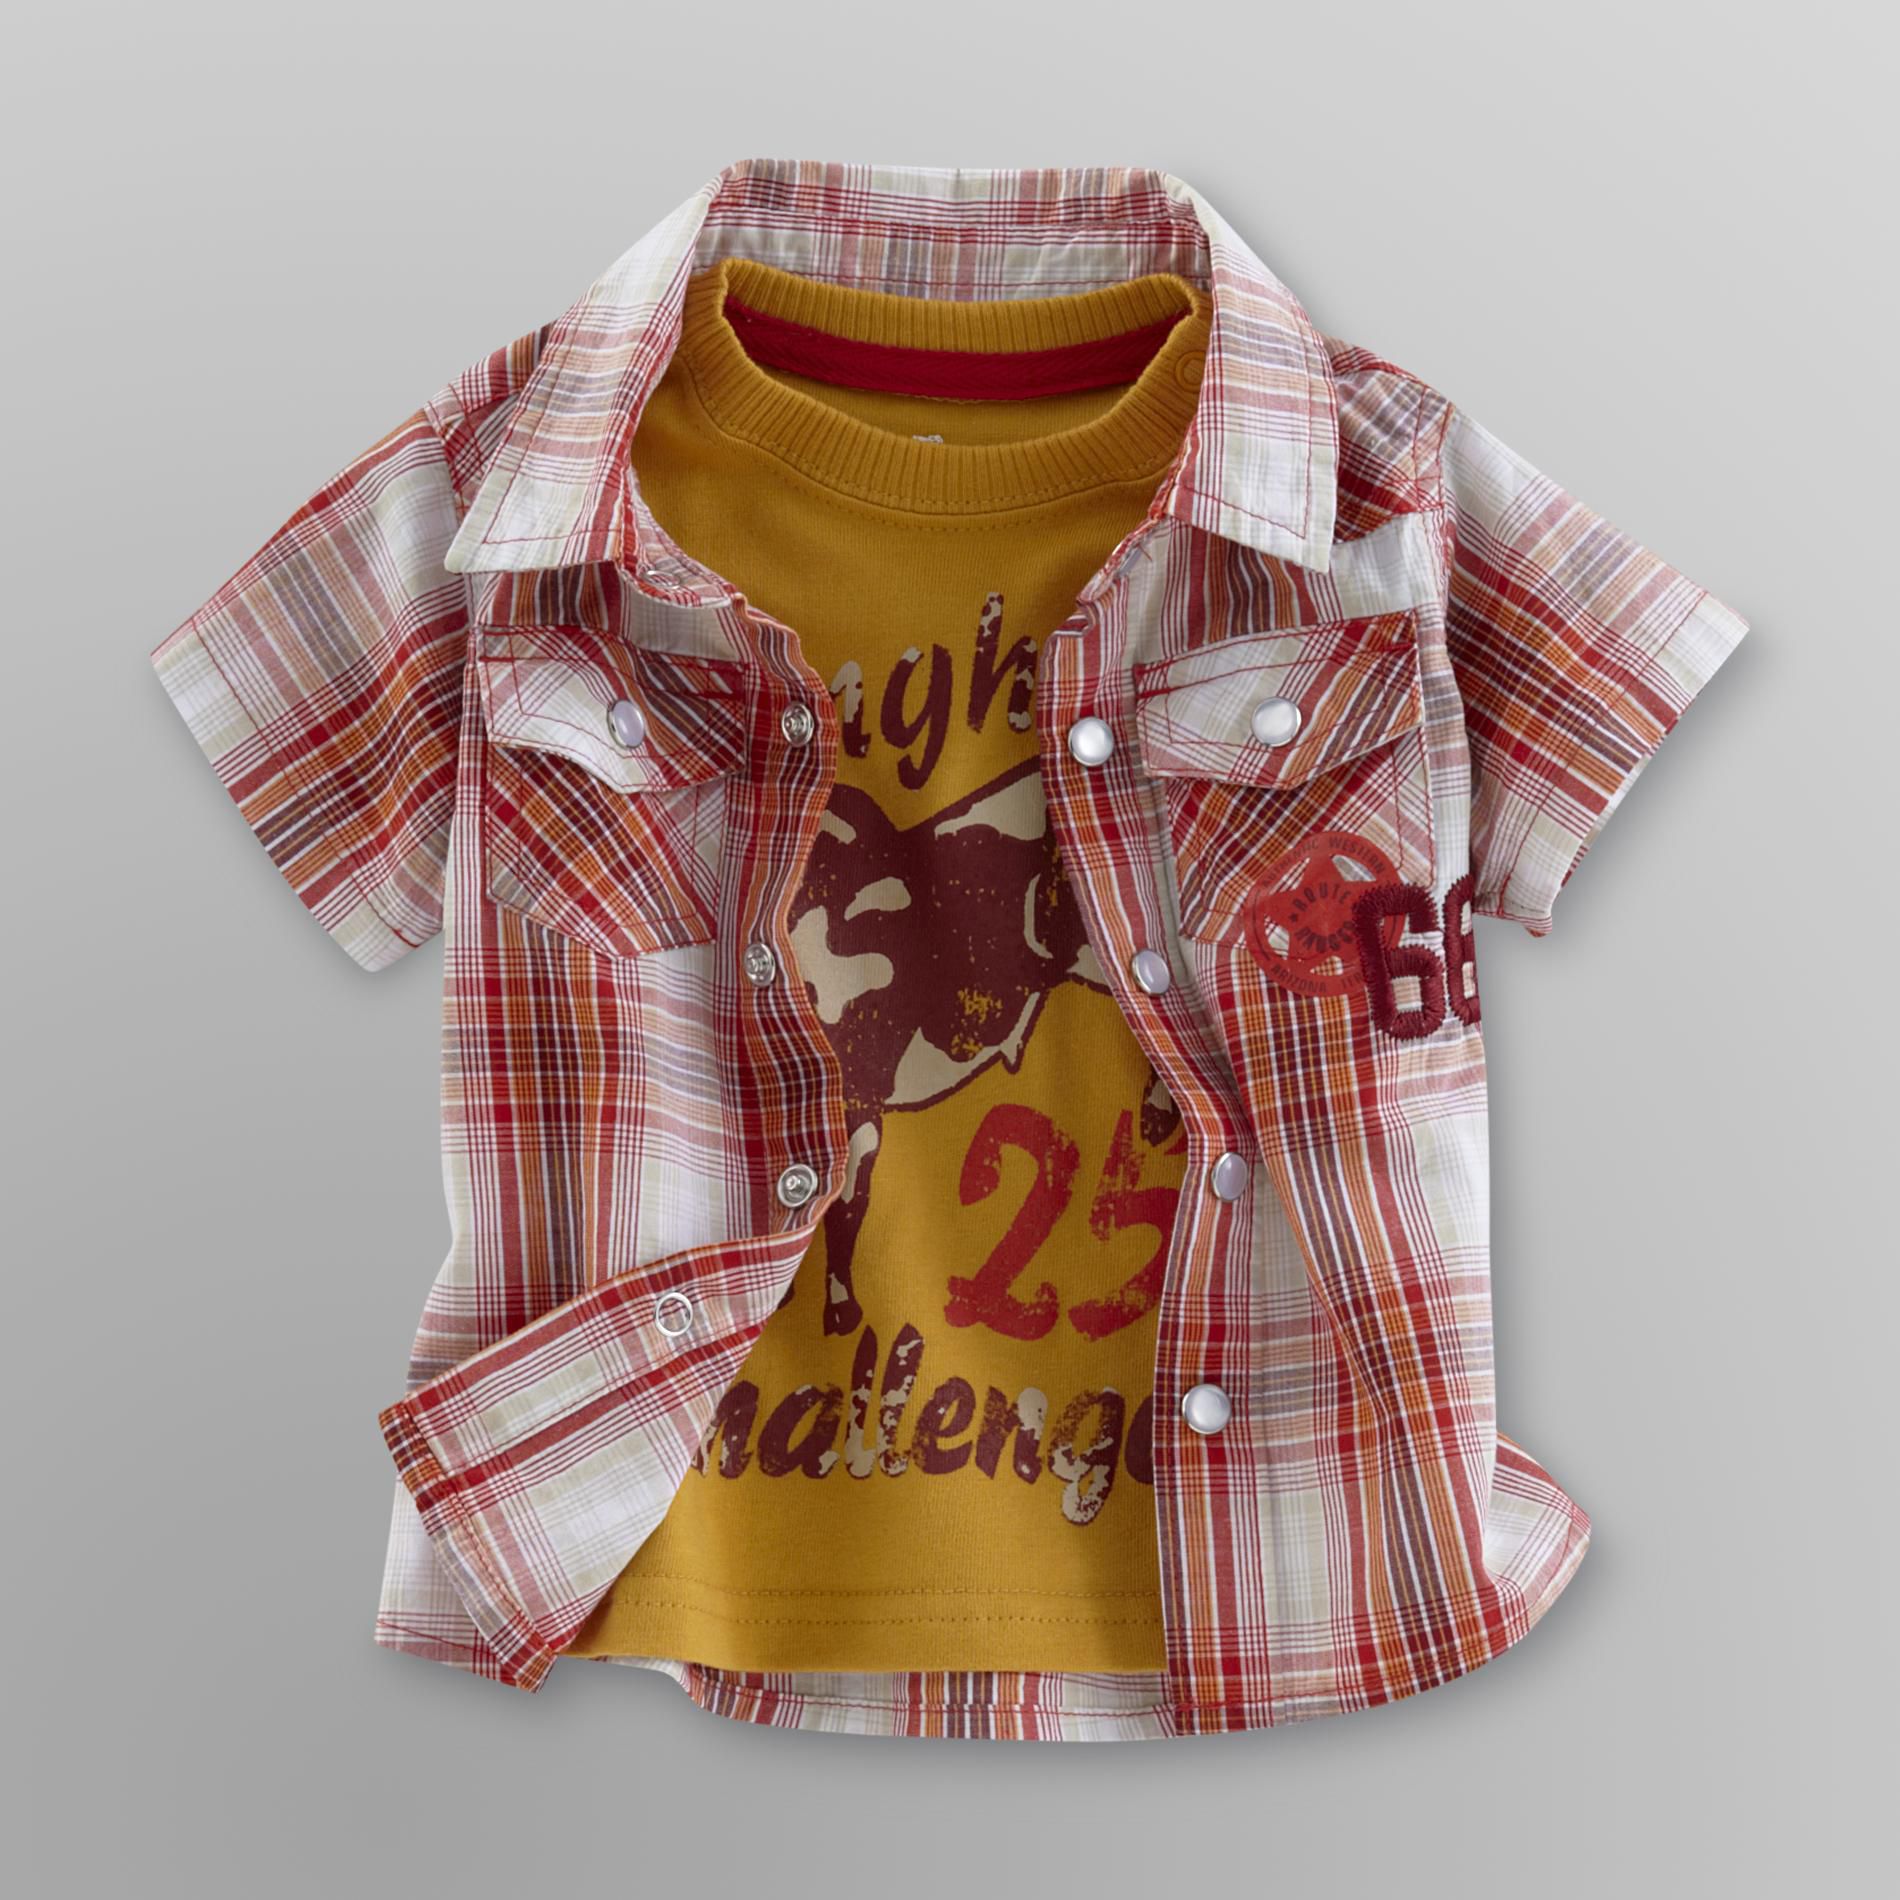 Route 66 Infant Boy's Plaid Shirt and Graphic Tee - Cowboy